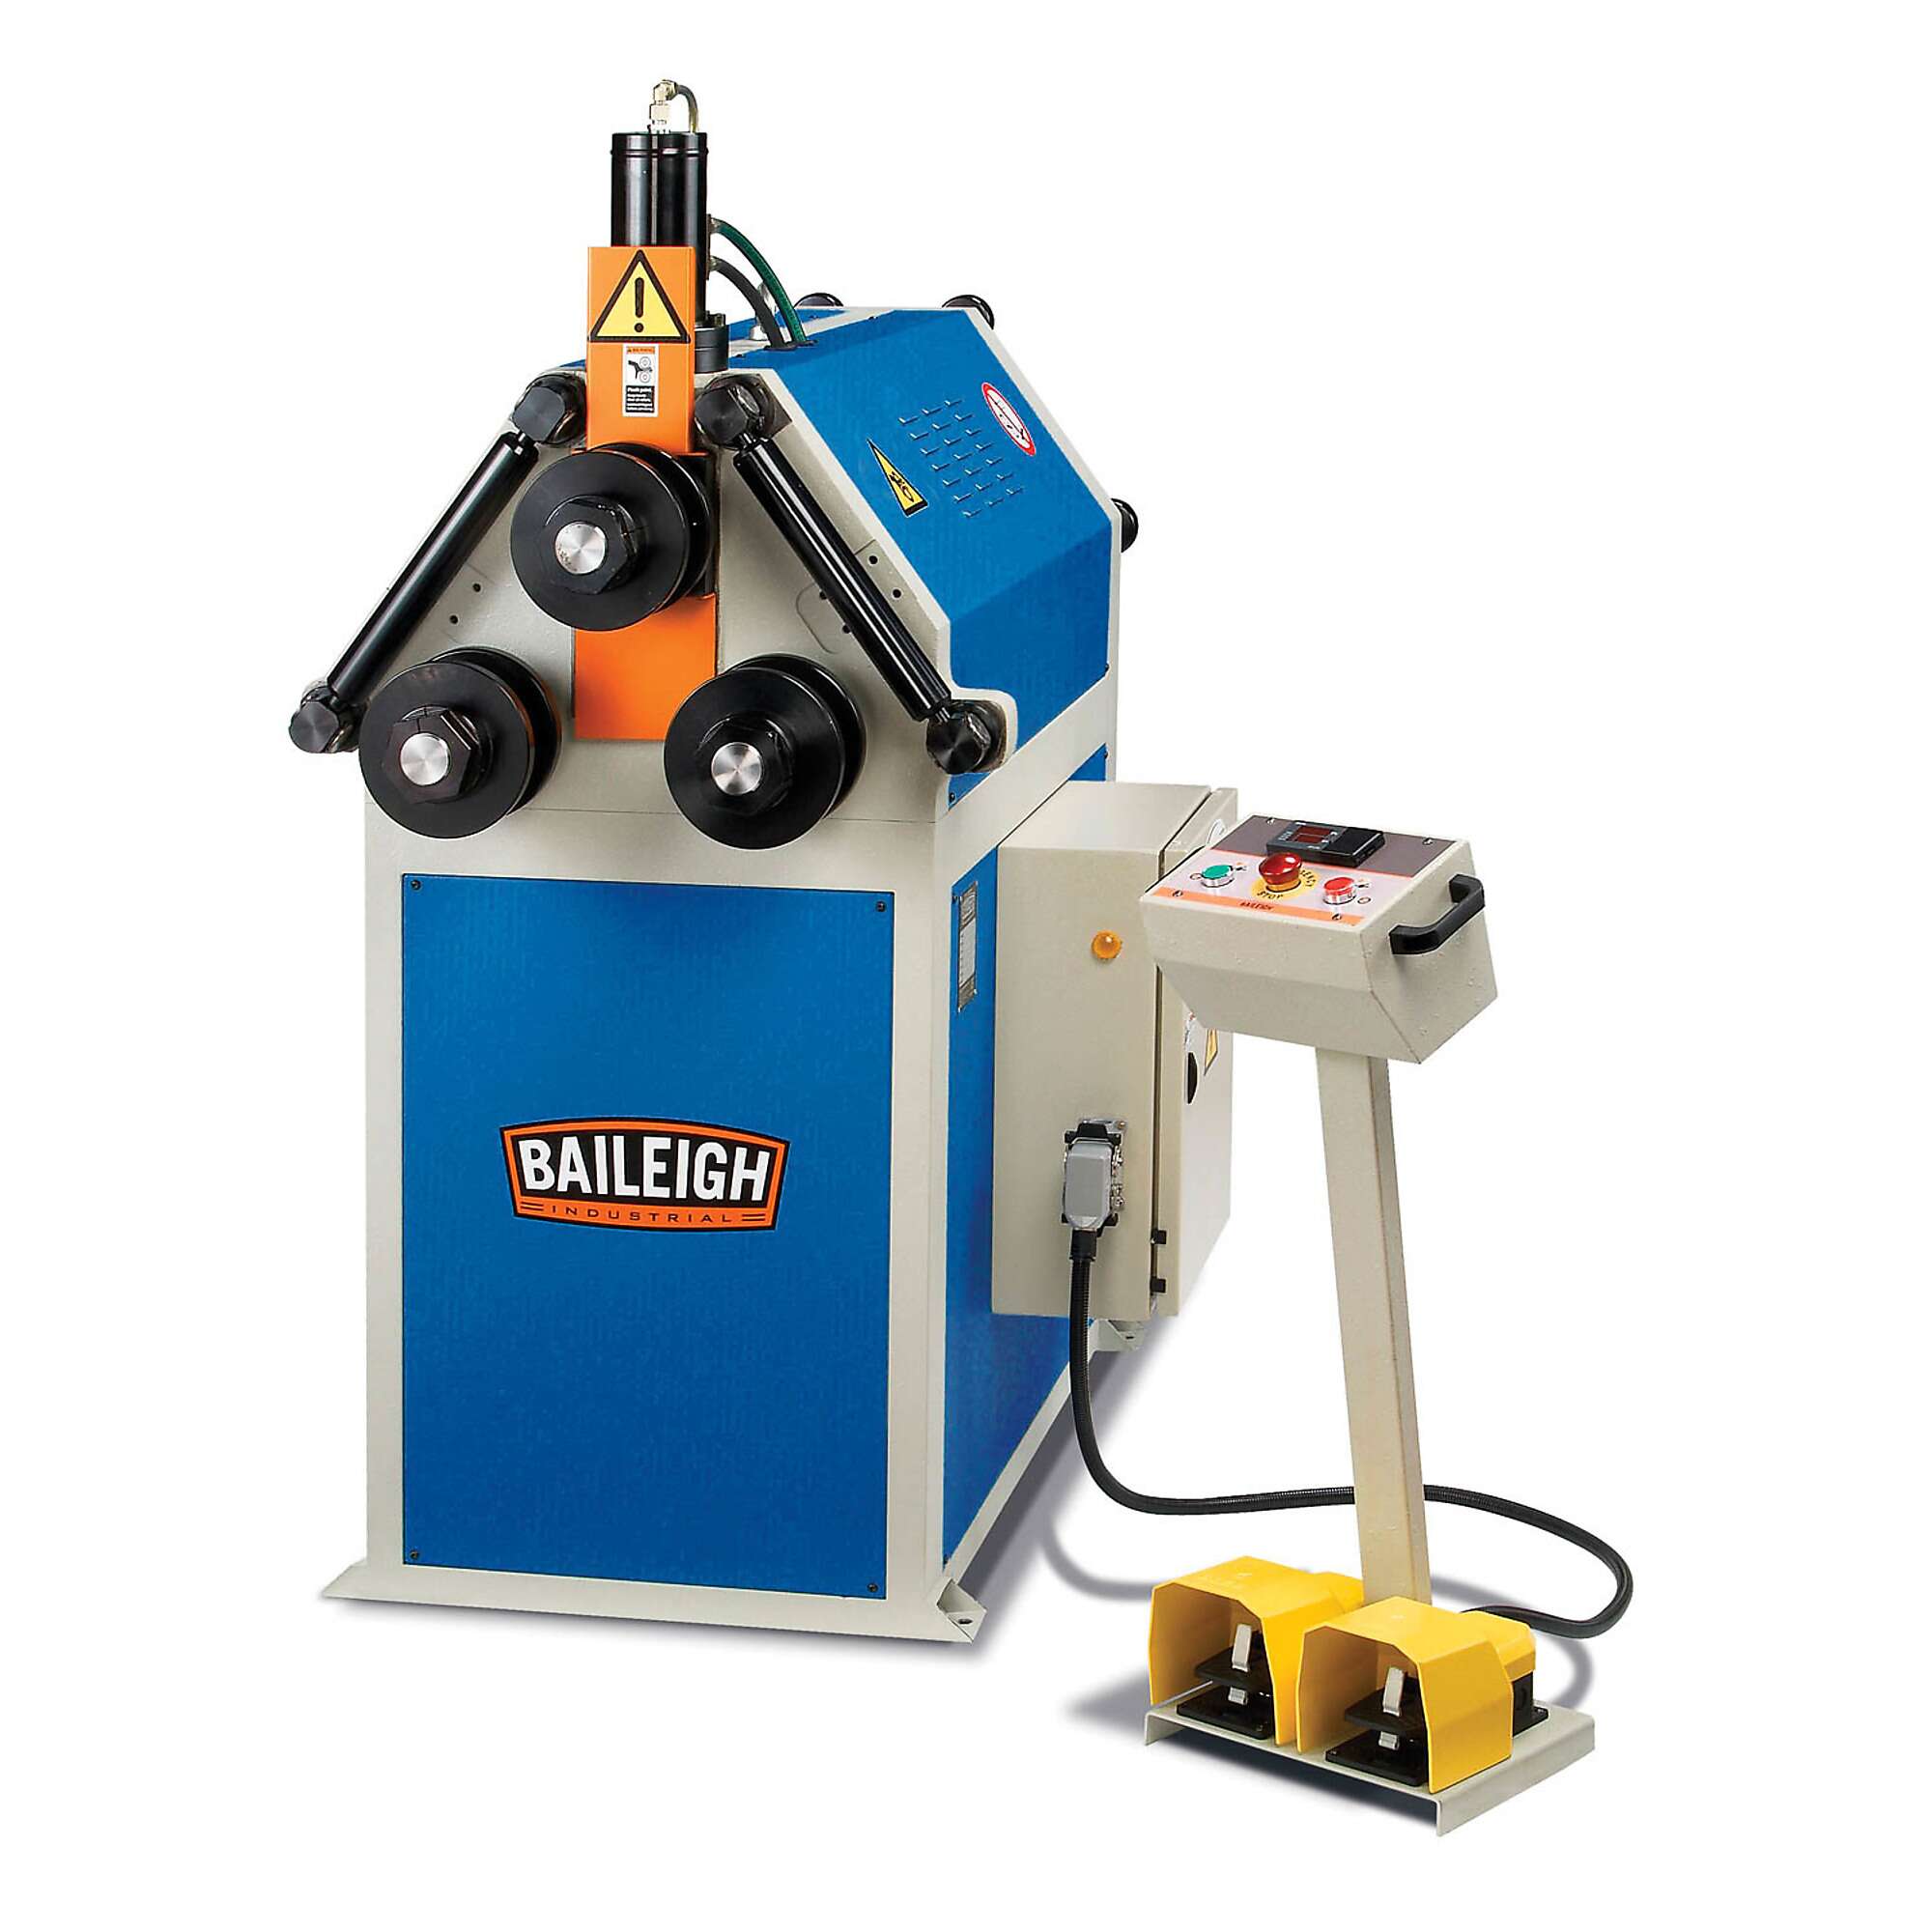 Baileigh 220Volt Three Phase Roll Bender with Hydraulic Mov Max Bending Capacity Flat 5 in Max Bending Capacity Round 3 in Max Material Gauge 20